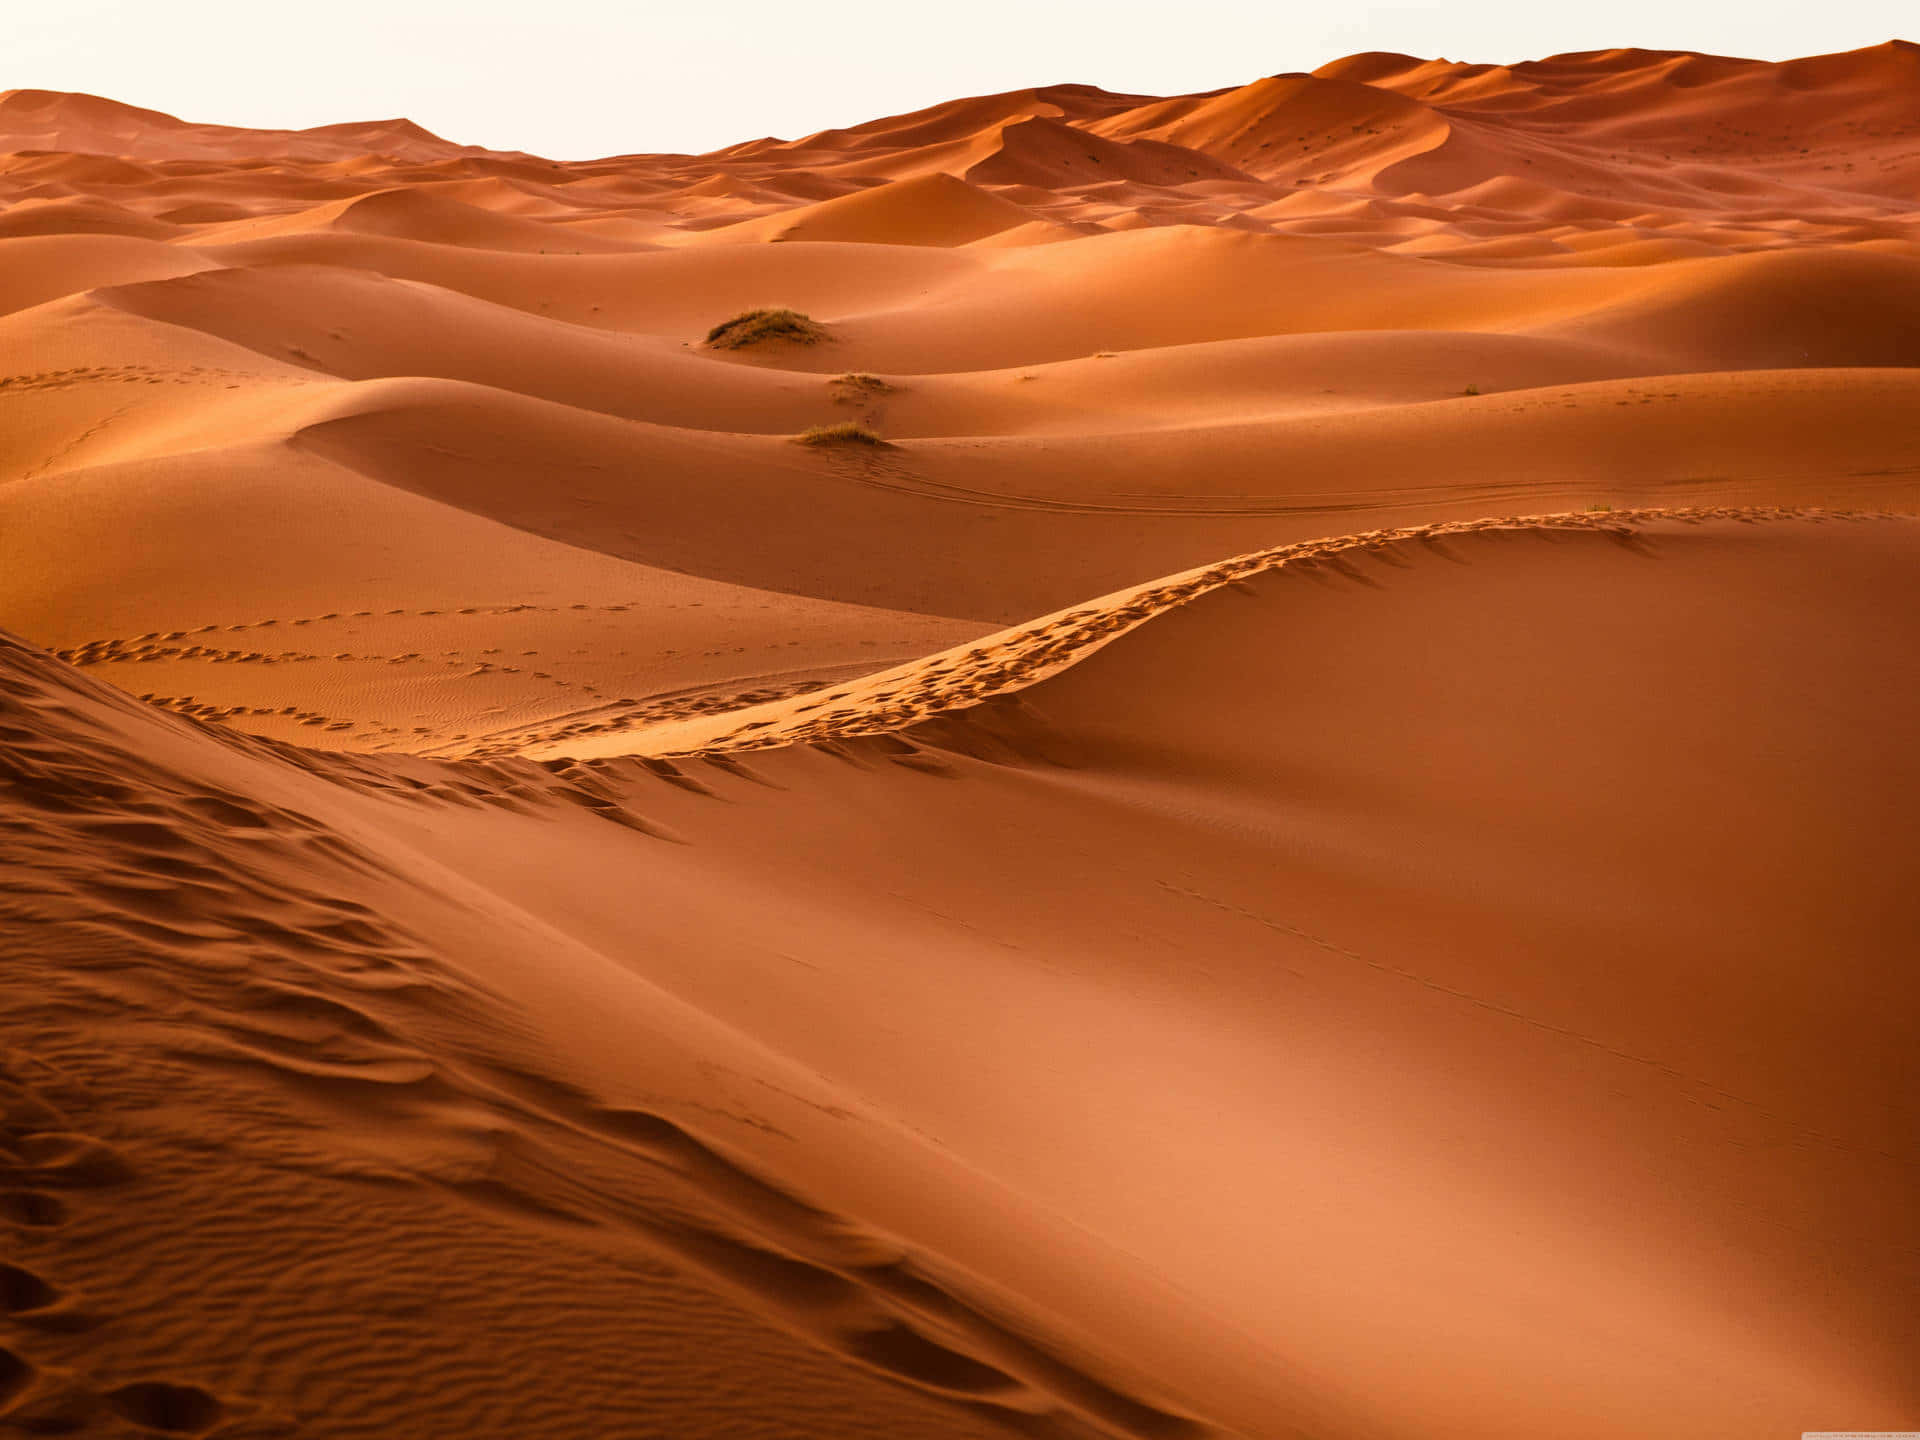 Find your peace in the Arabian desert